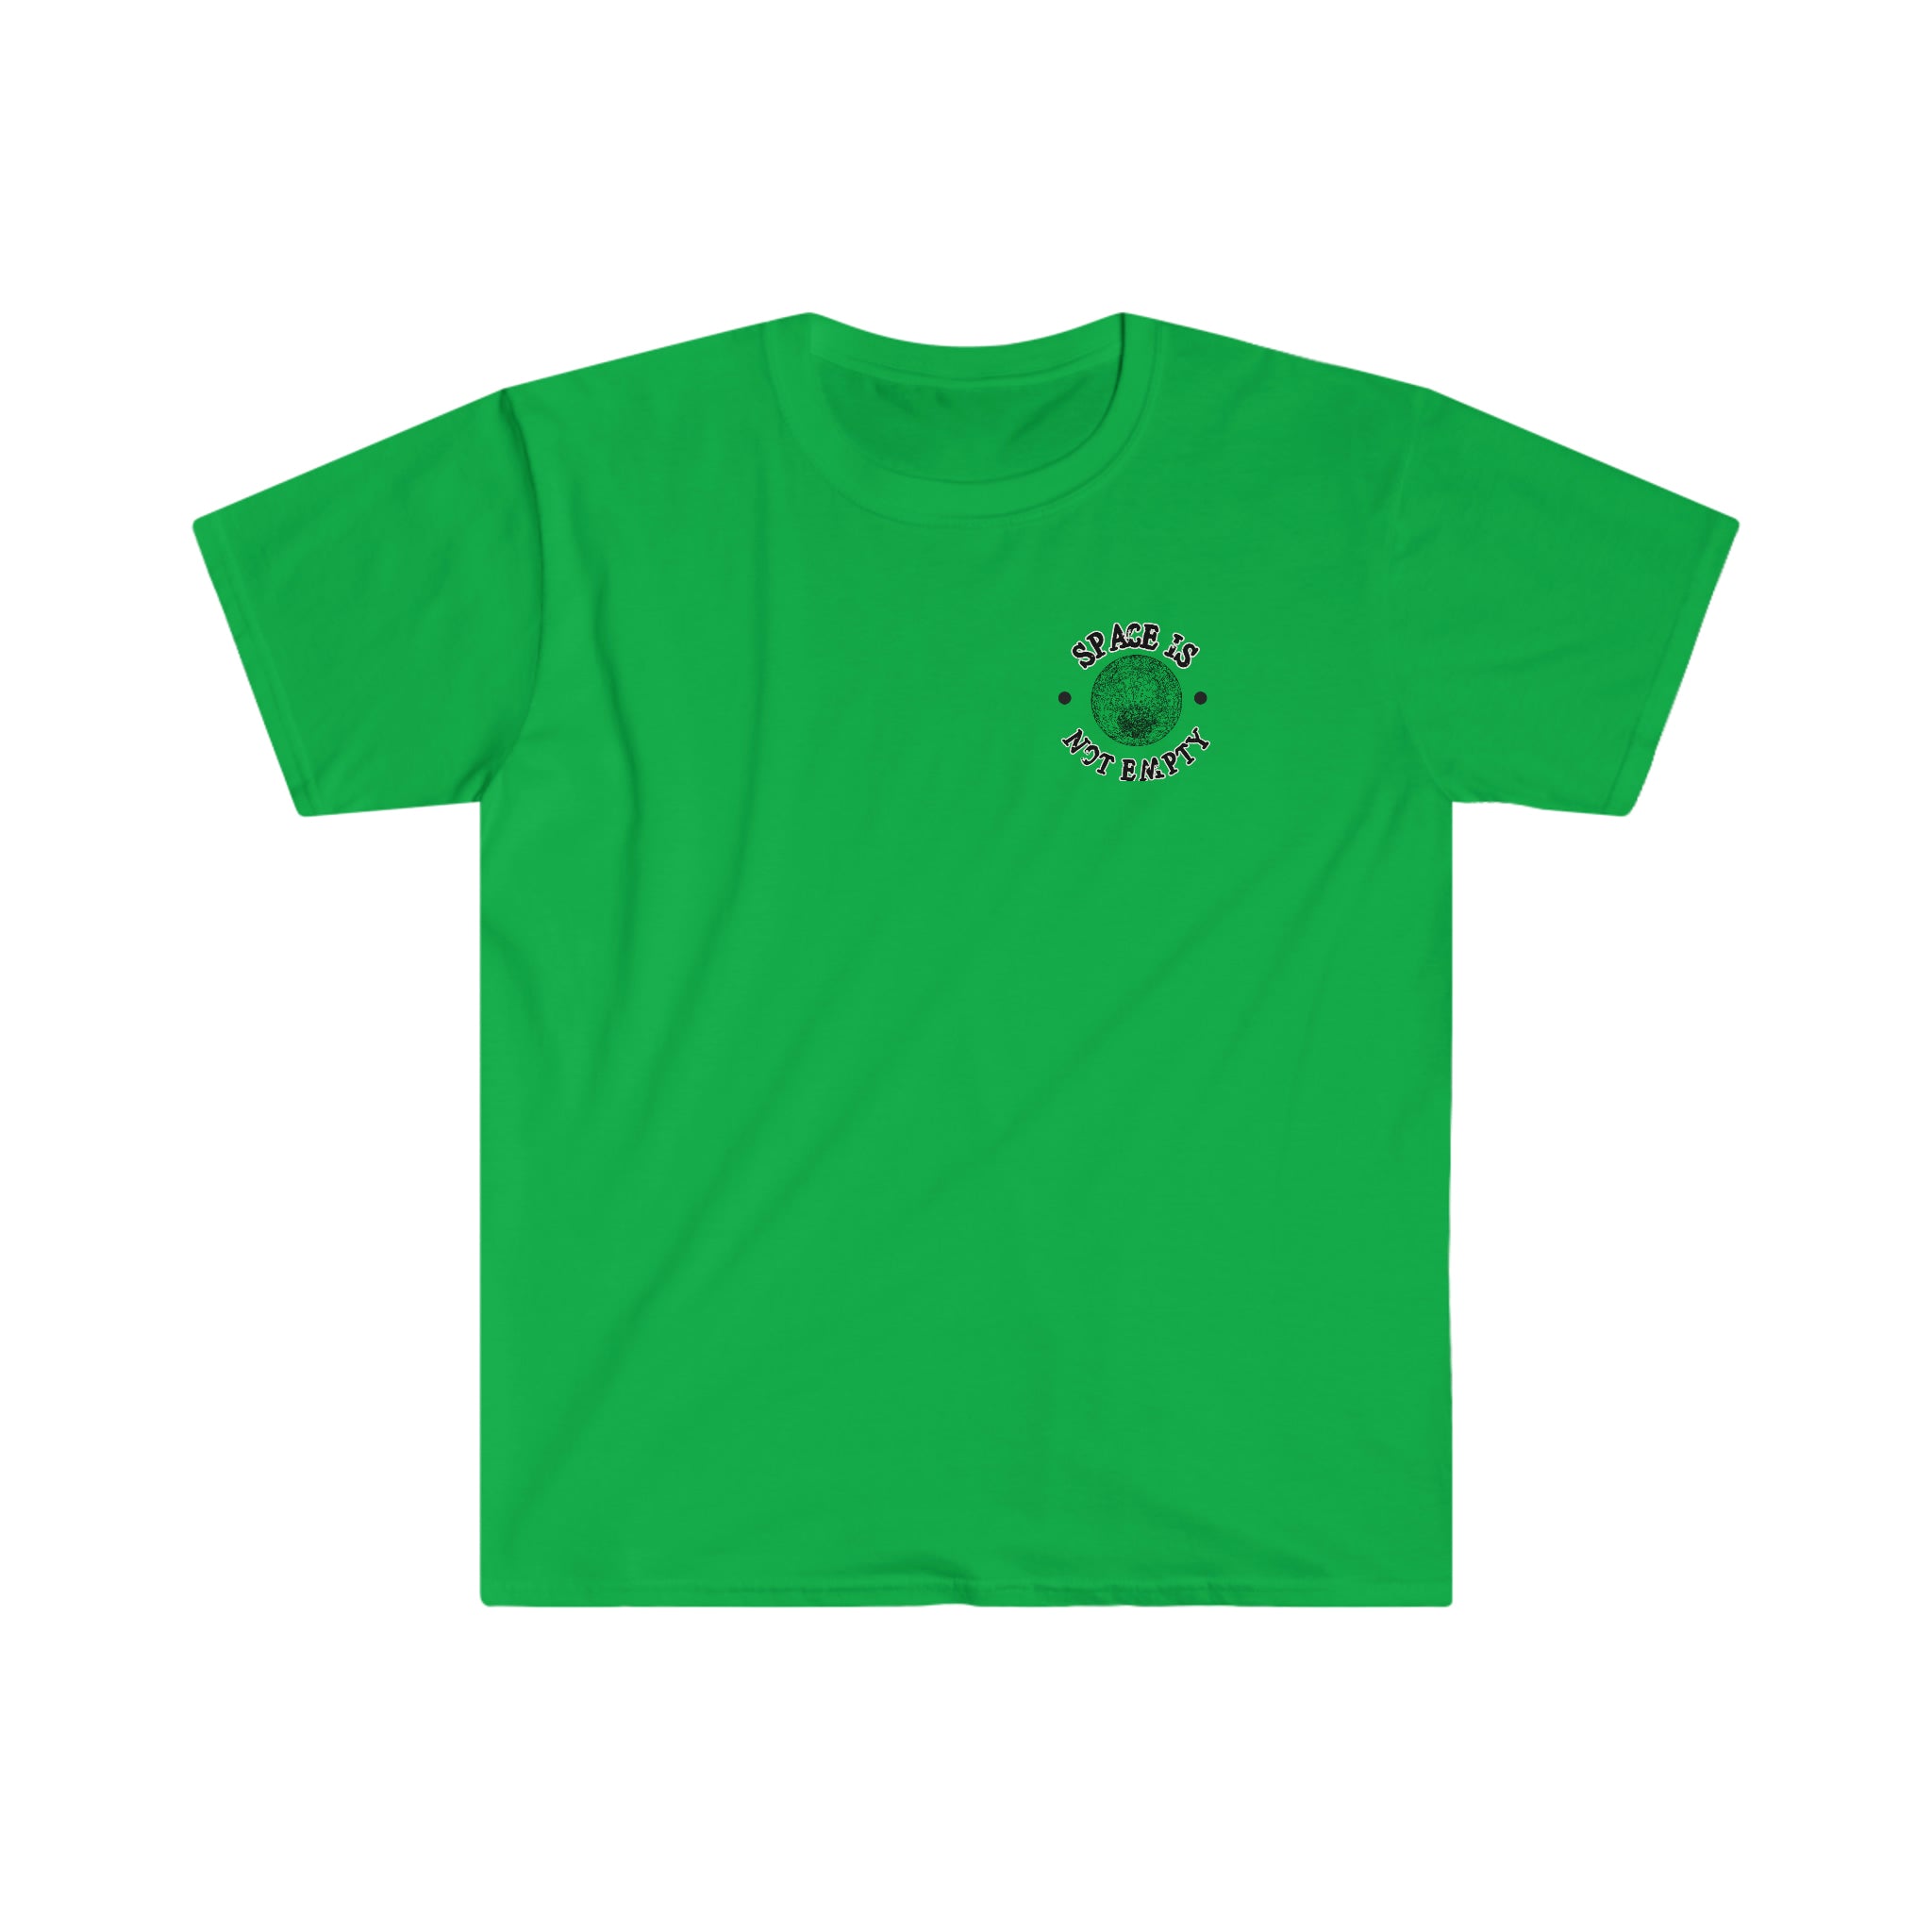 A Space is Waiting T-Shirt with a green flower on it.